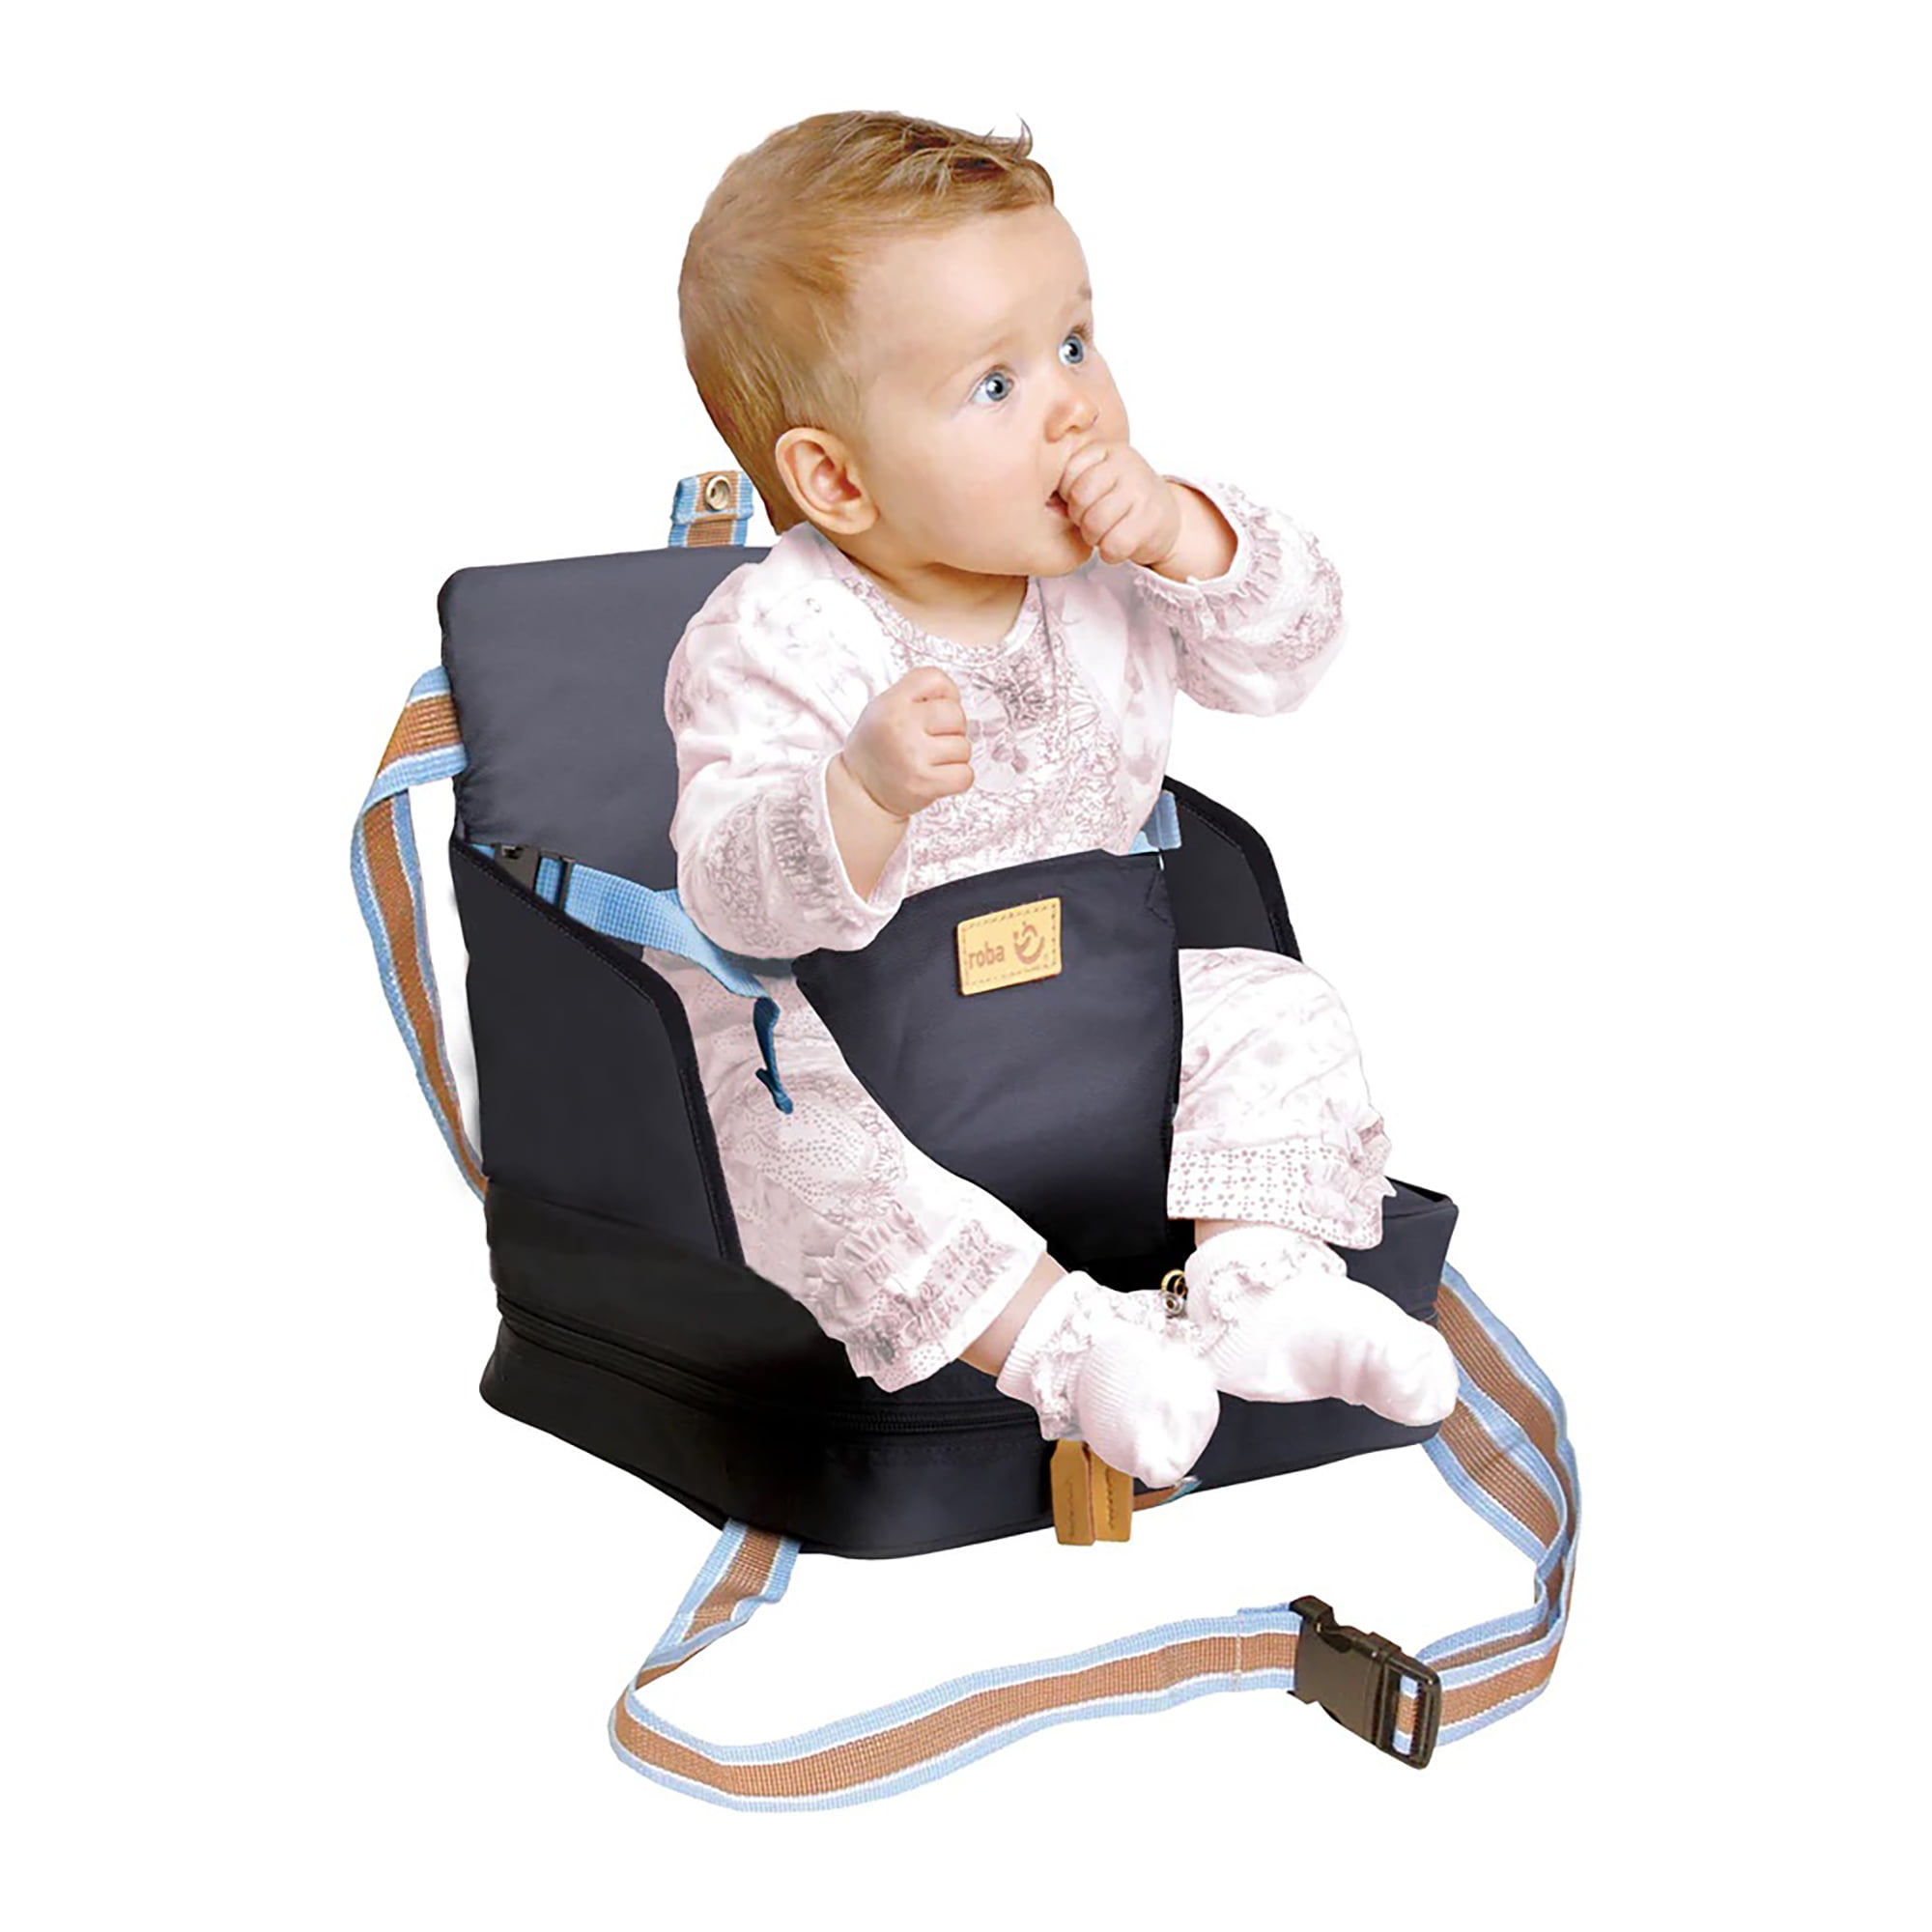 Syhood Baby Inflatable Seat Baby Seats for Sitting up Portable